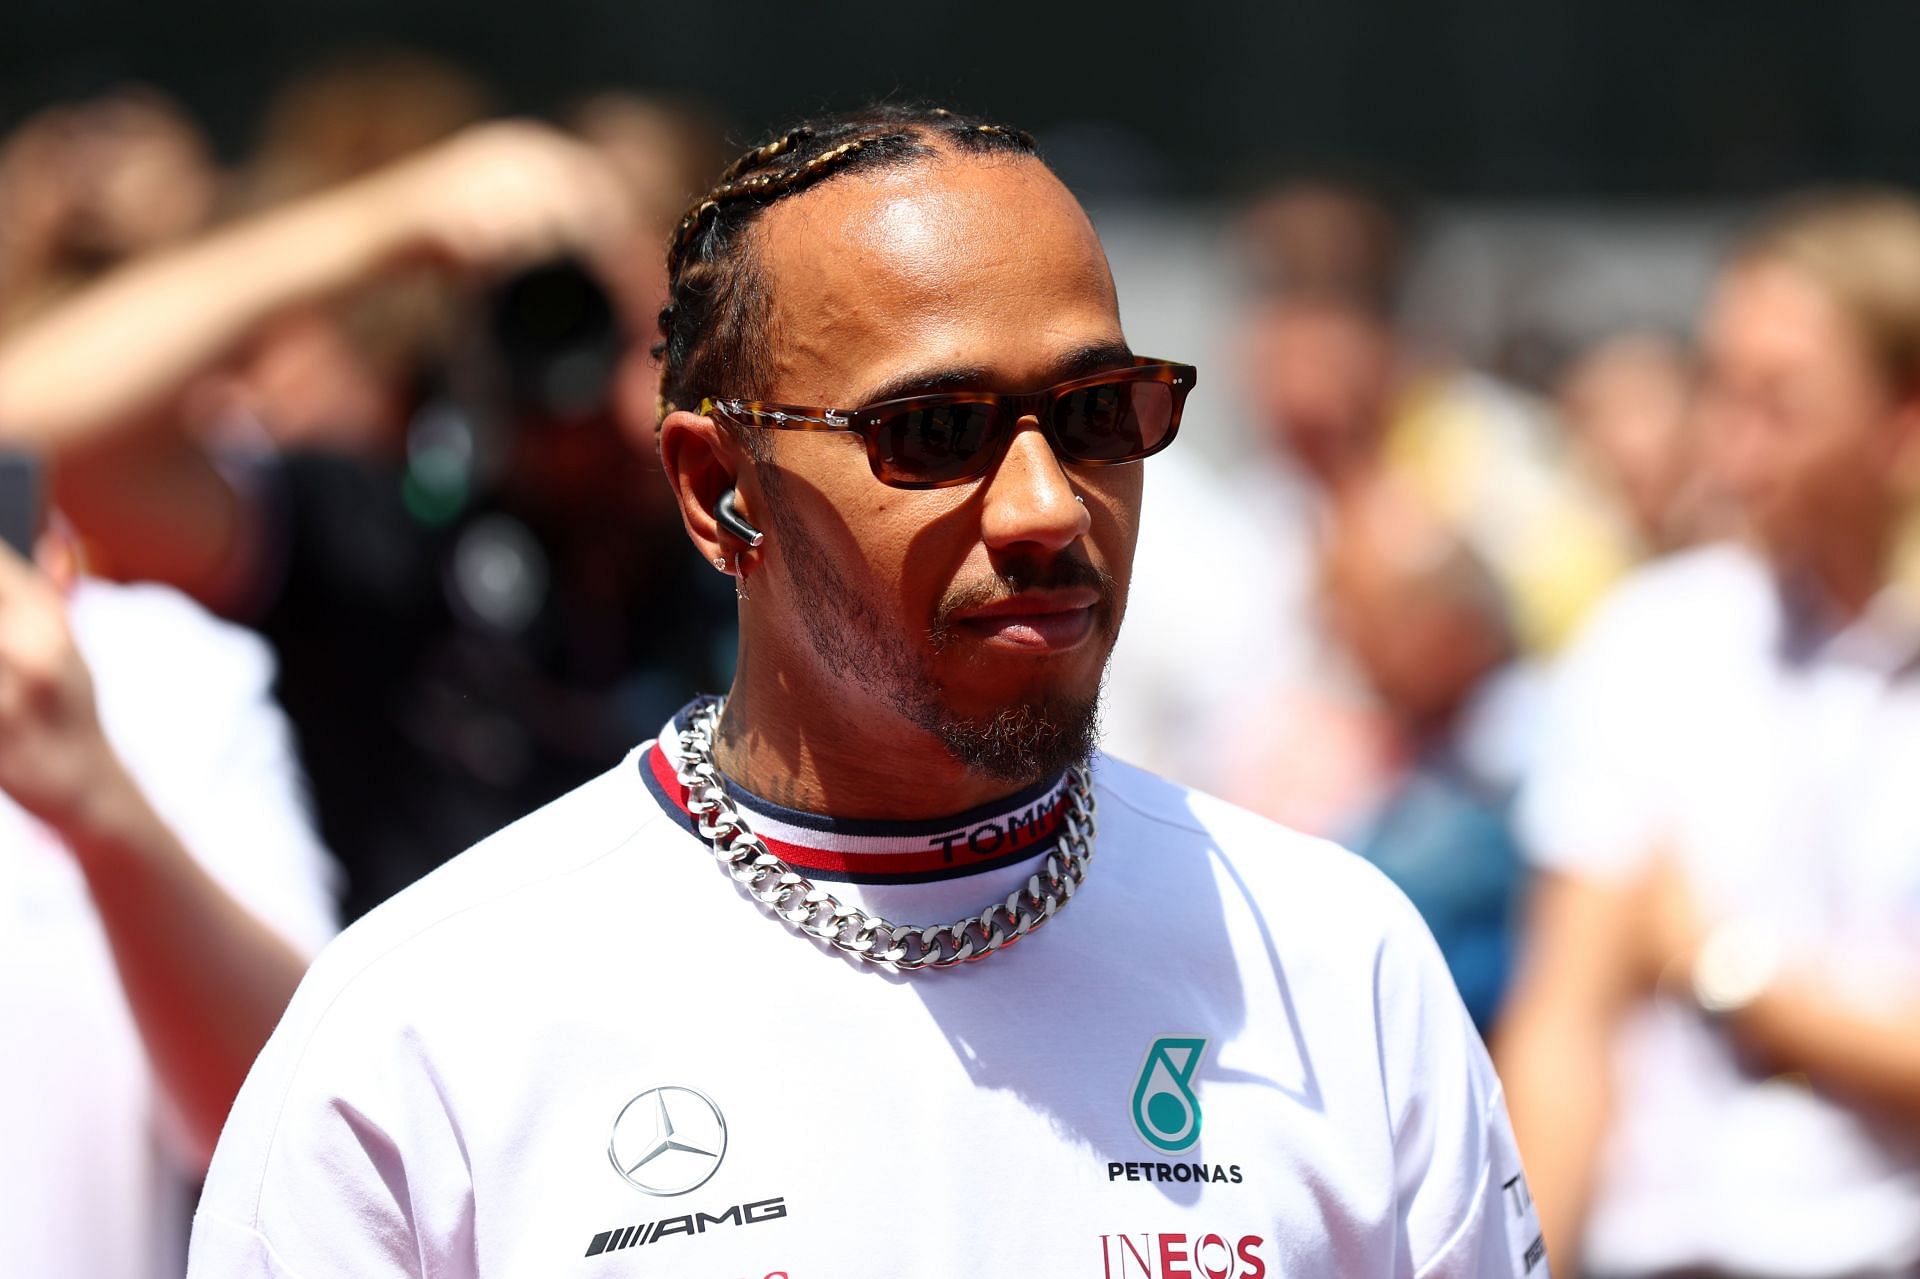 Lewis Hamilton had one of his strongest weekends this season at the Spanish GP